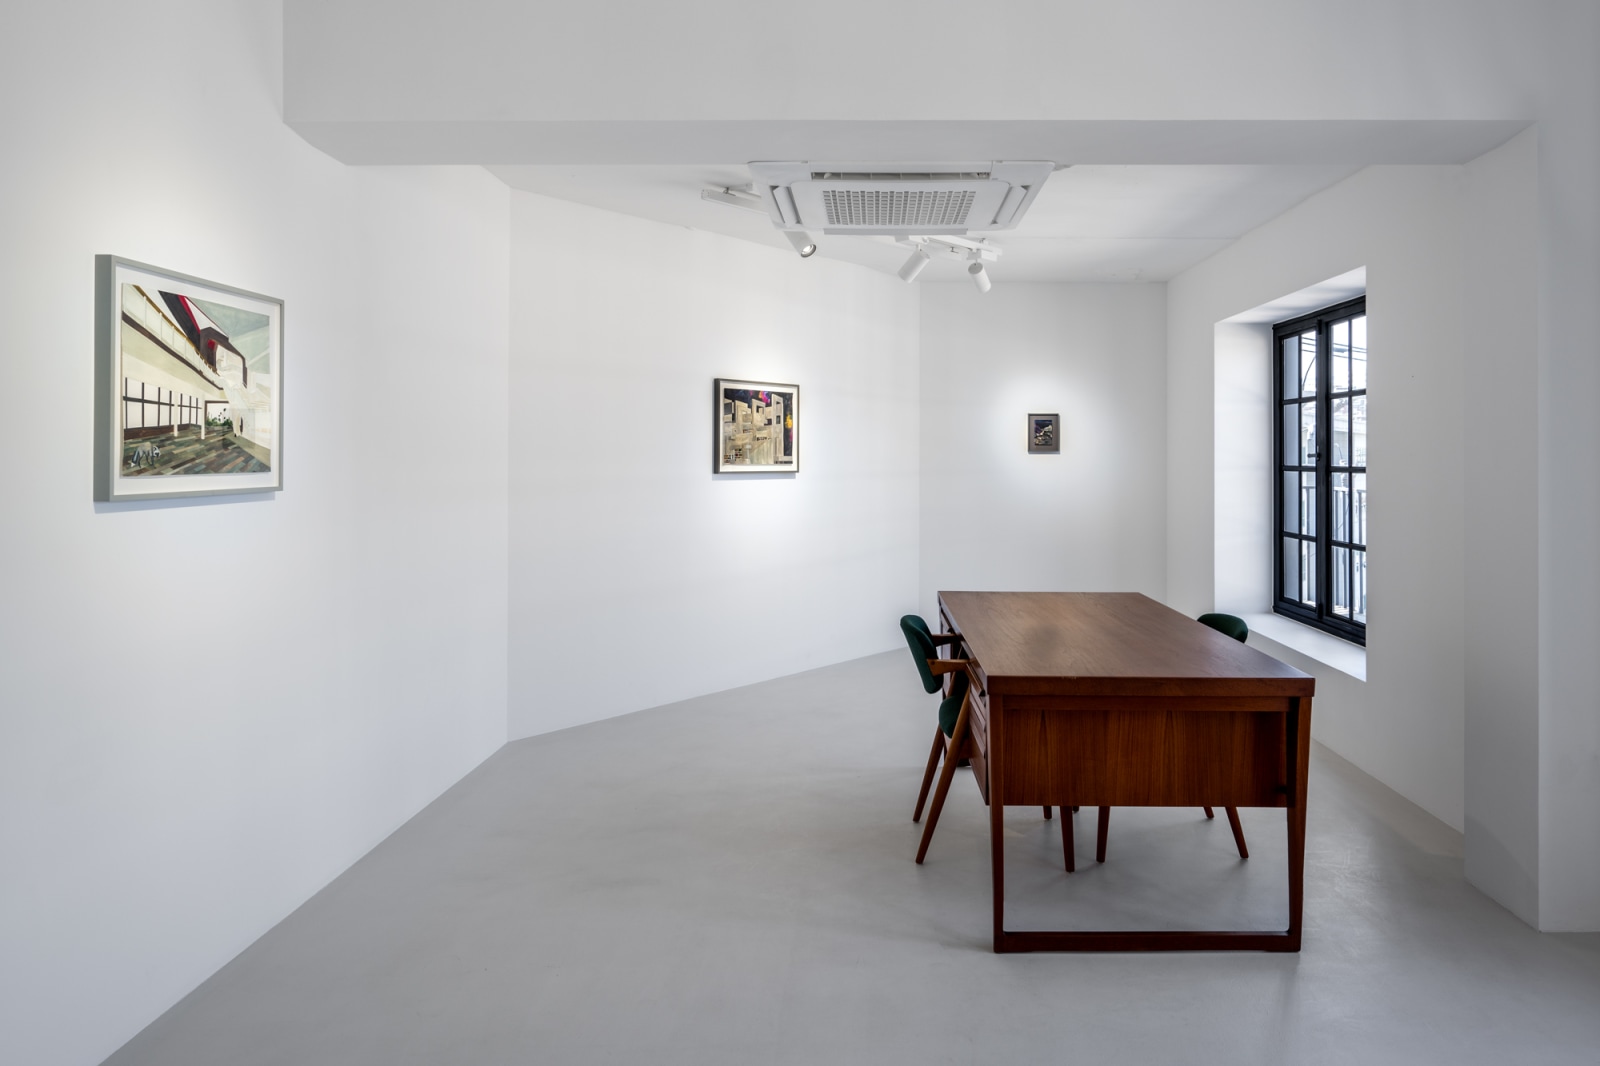 <div class="image_caption_container"><div class="image_caption"><p>Exhibition view: <strong>The Window. Isa Melsheimer</strong>, Esther Schipper, Seoul, 2023. Photo © Hyun Jun Lee </p></div></div>